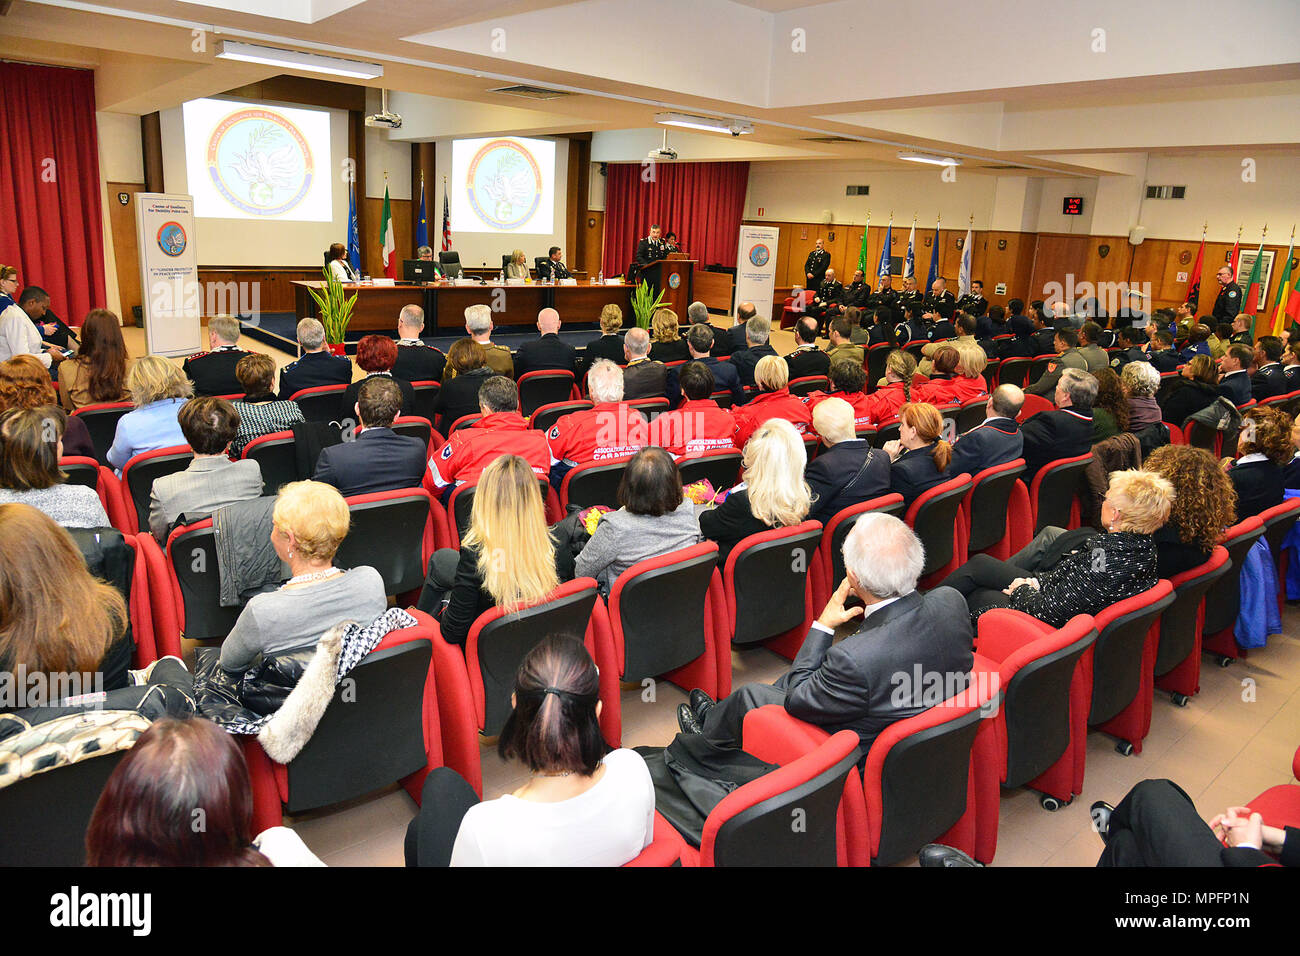 Brig. Gen. Giovanni Pietro Barbano , Center of Excellence for Stability Police Units (CoESPU) director, addresses attendees at the opening ceremony of the 5th “Gender Protection in Peace Operations” Course at the  CoESPU in Vicenza, Italy, Mar. 8, 2017. The event brought together military and civic leaders of the local community and offered the opportunity to celebrate International Women's Day. (U.S. Army Photo by Visual Information Specialist Paolo Bovo/released) Stock Photo